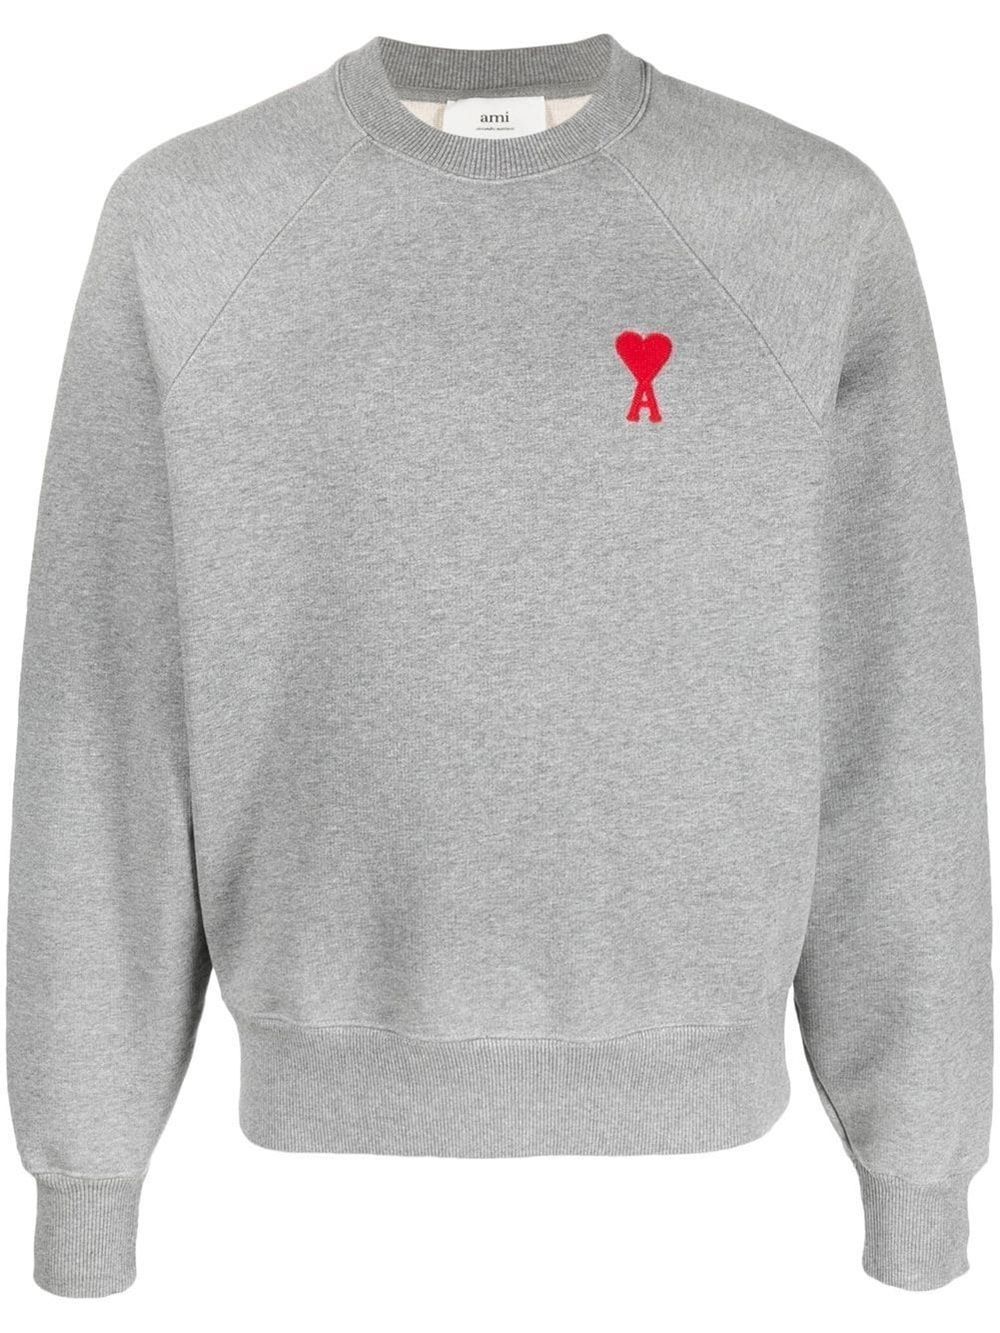 Signature Monogram Sweater is made with a blend of cotton that